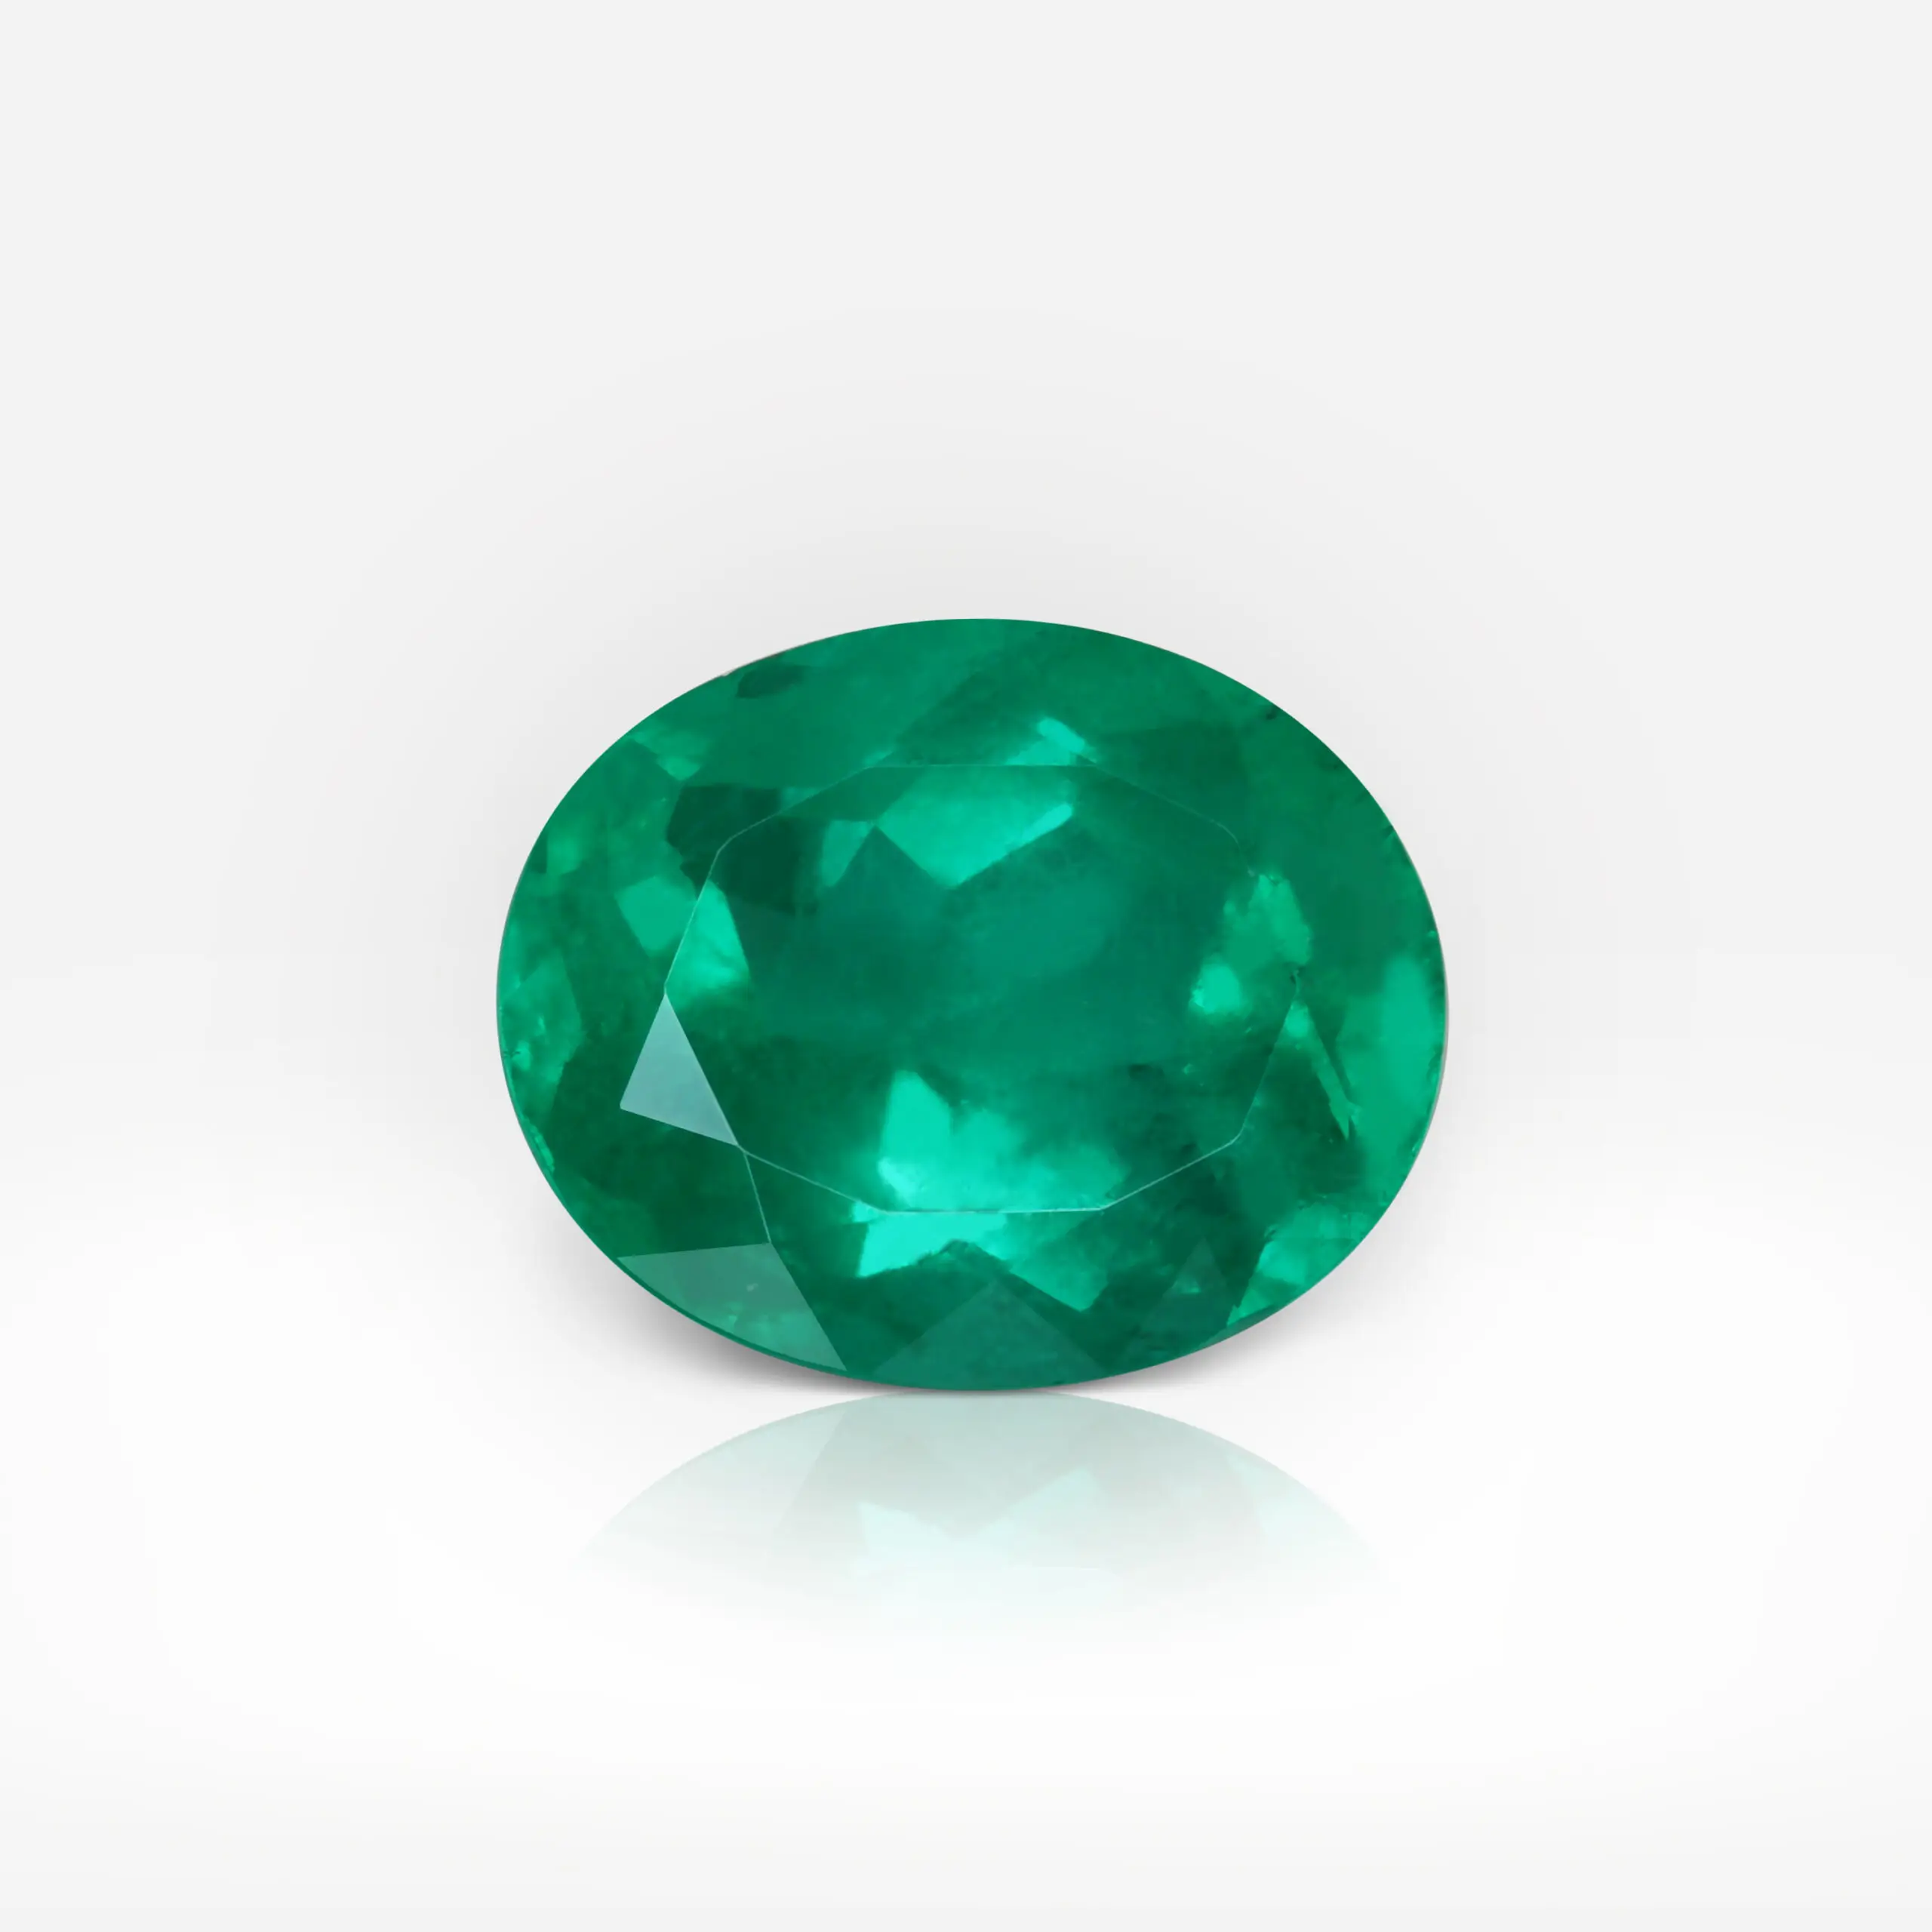 4.17 carat Oval Shape Intense Green Emerald - picture 1